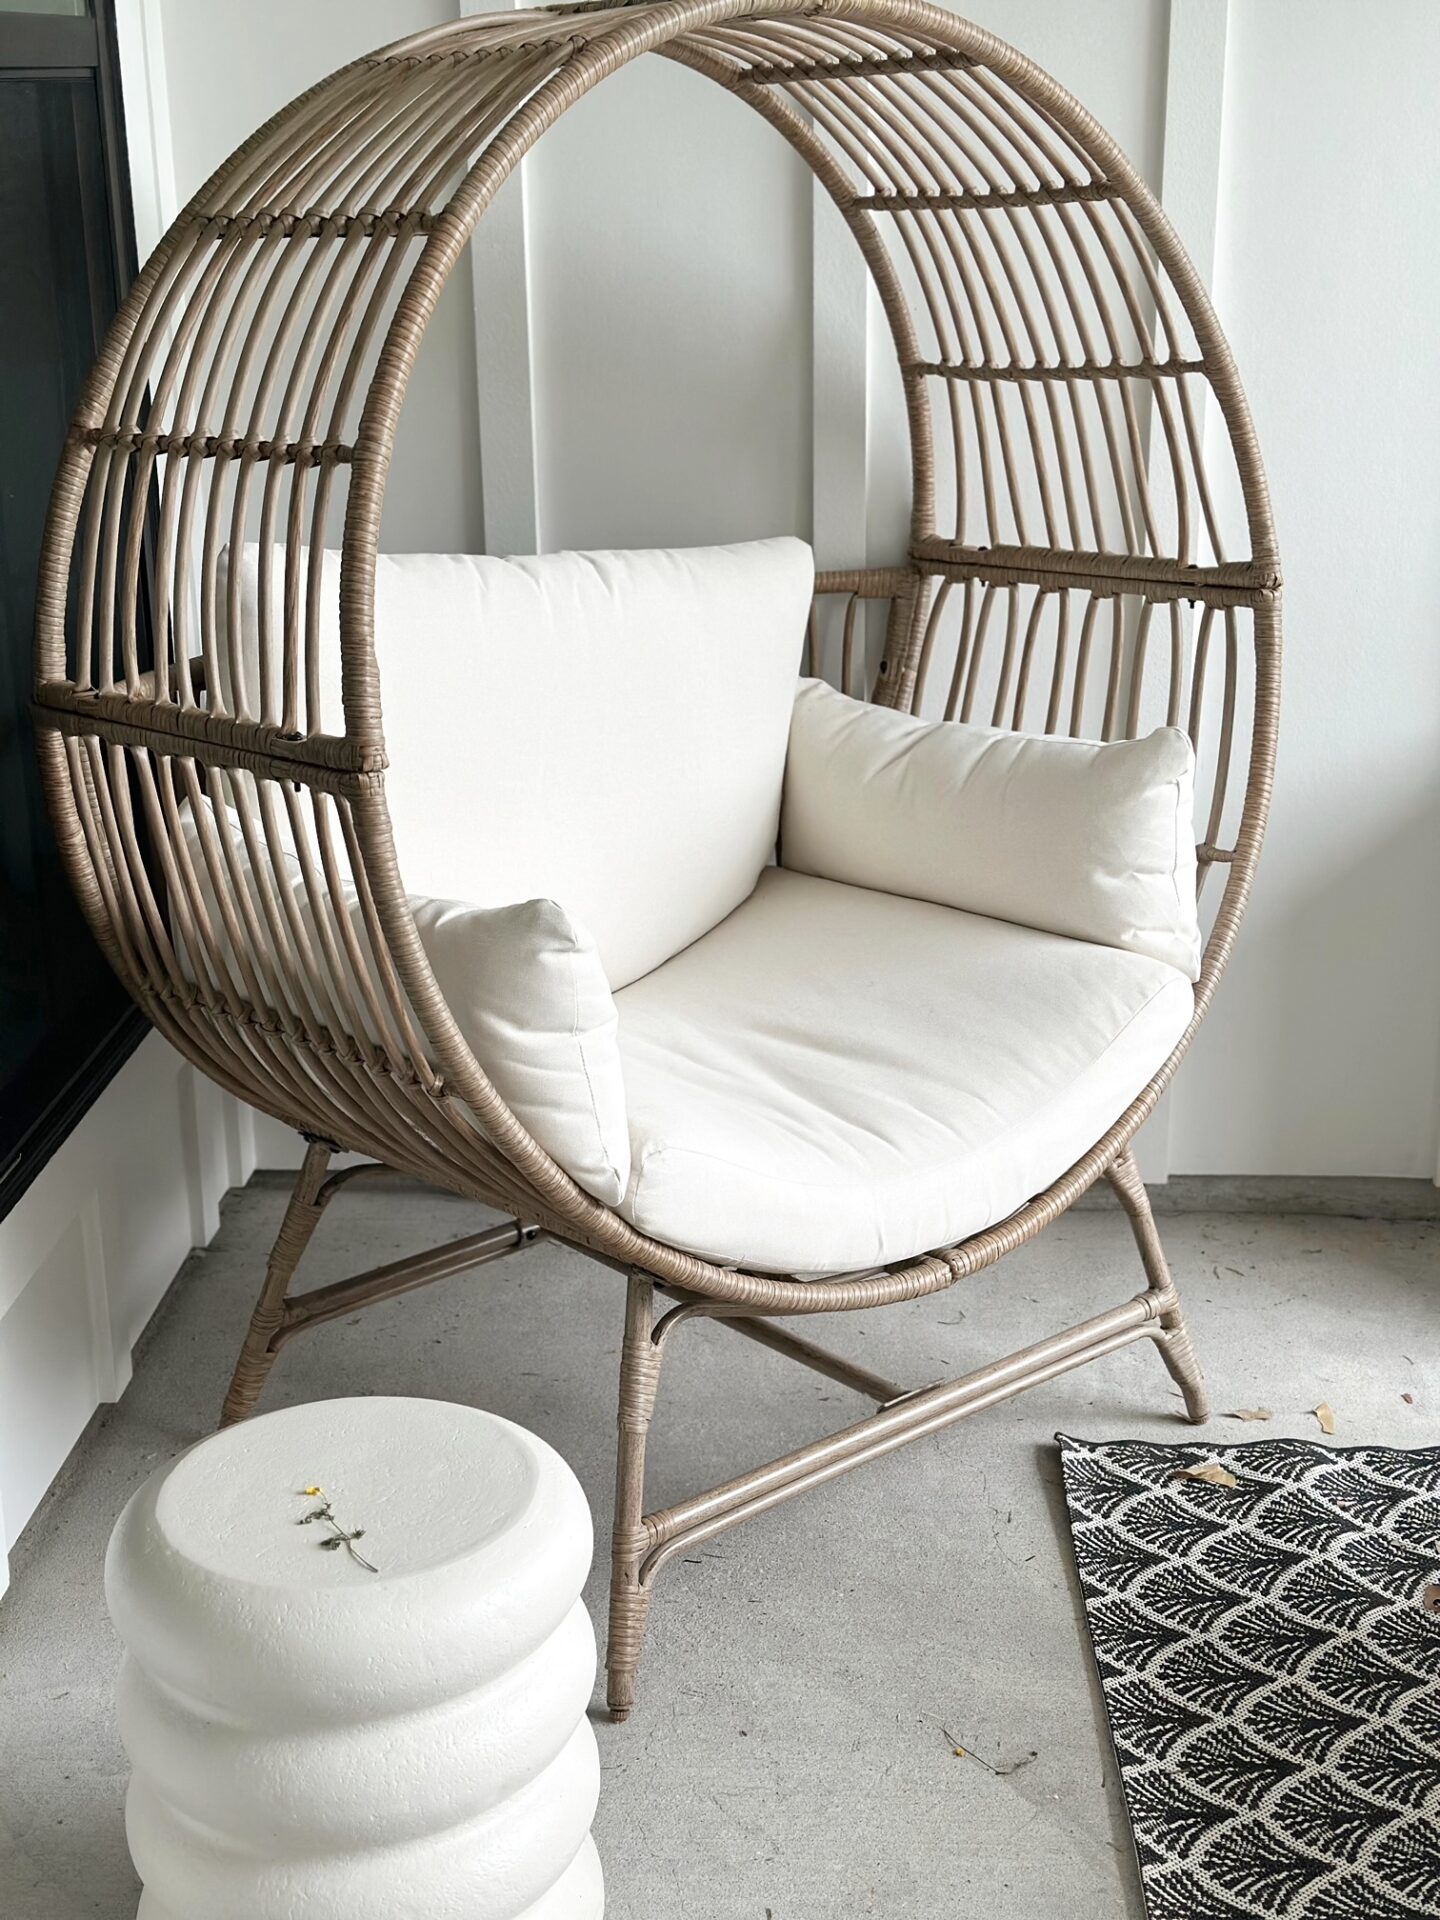 egg chair for patio furniture and decor